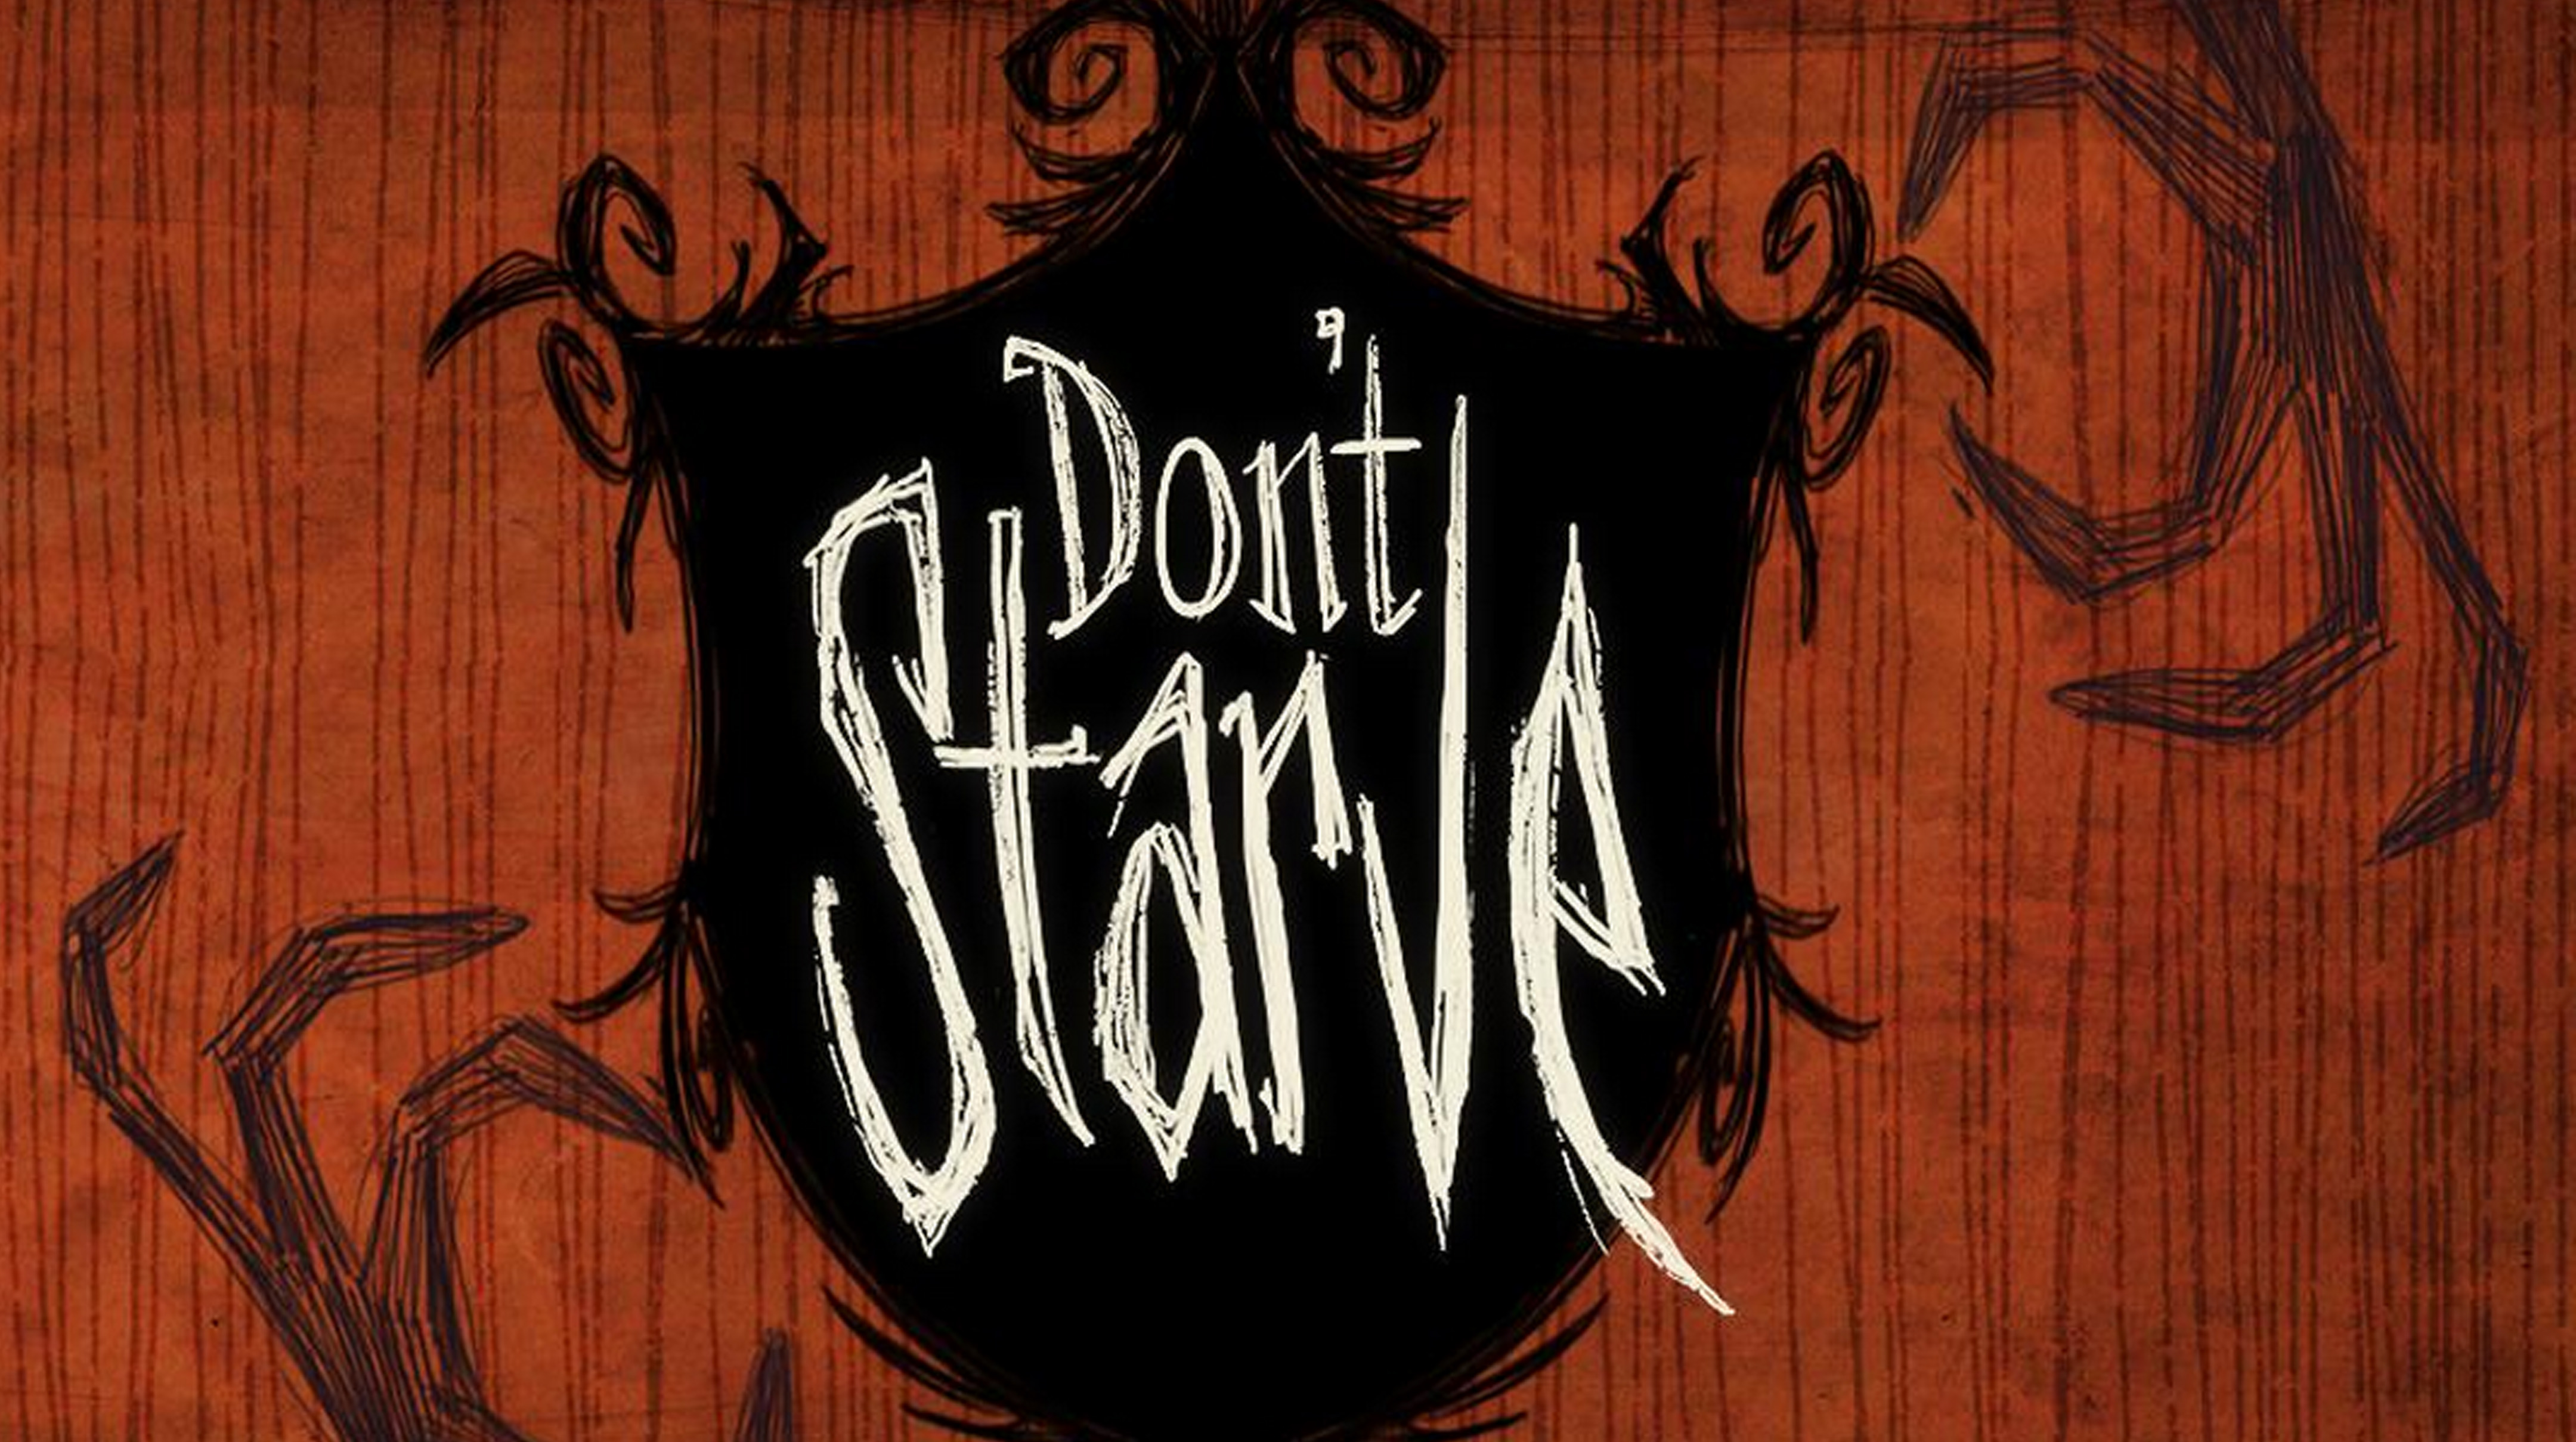 Don t object. Don't Starve together menu. Don't Starve together меню. Don't Starve логотип. Don't Starve фон.